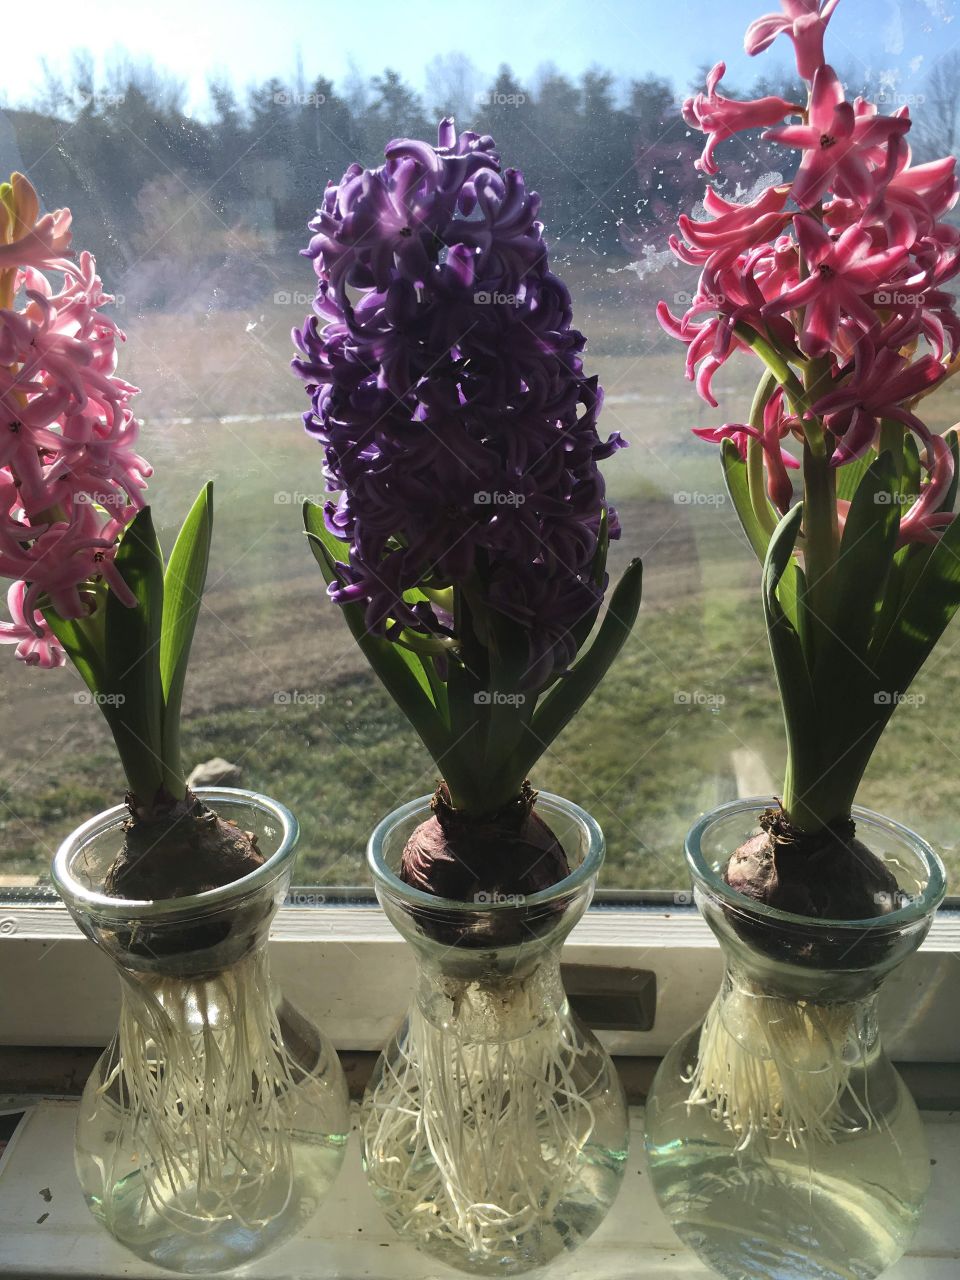 I bought these hyacinth plants in vases at Walmart. I call the “spring in a bottle”.